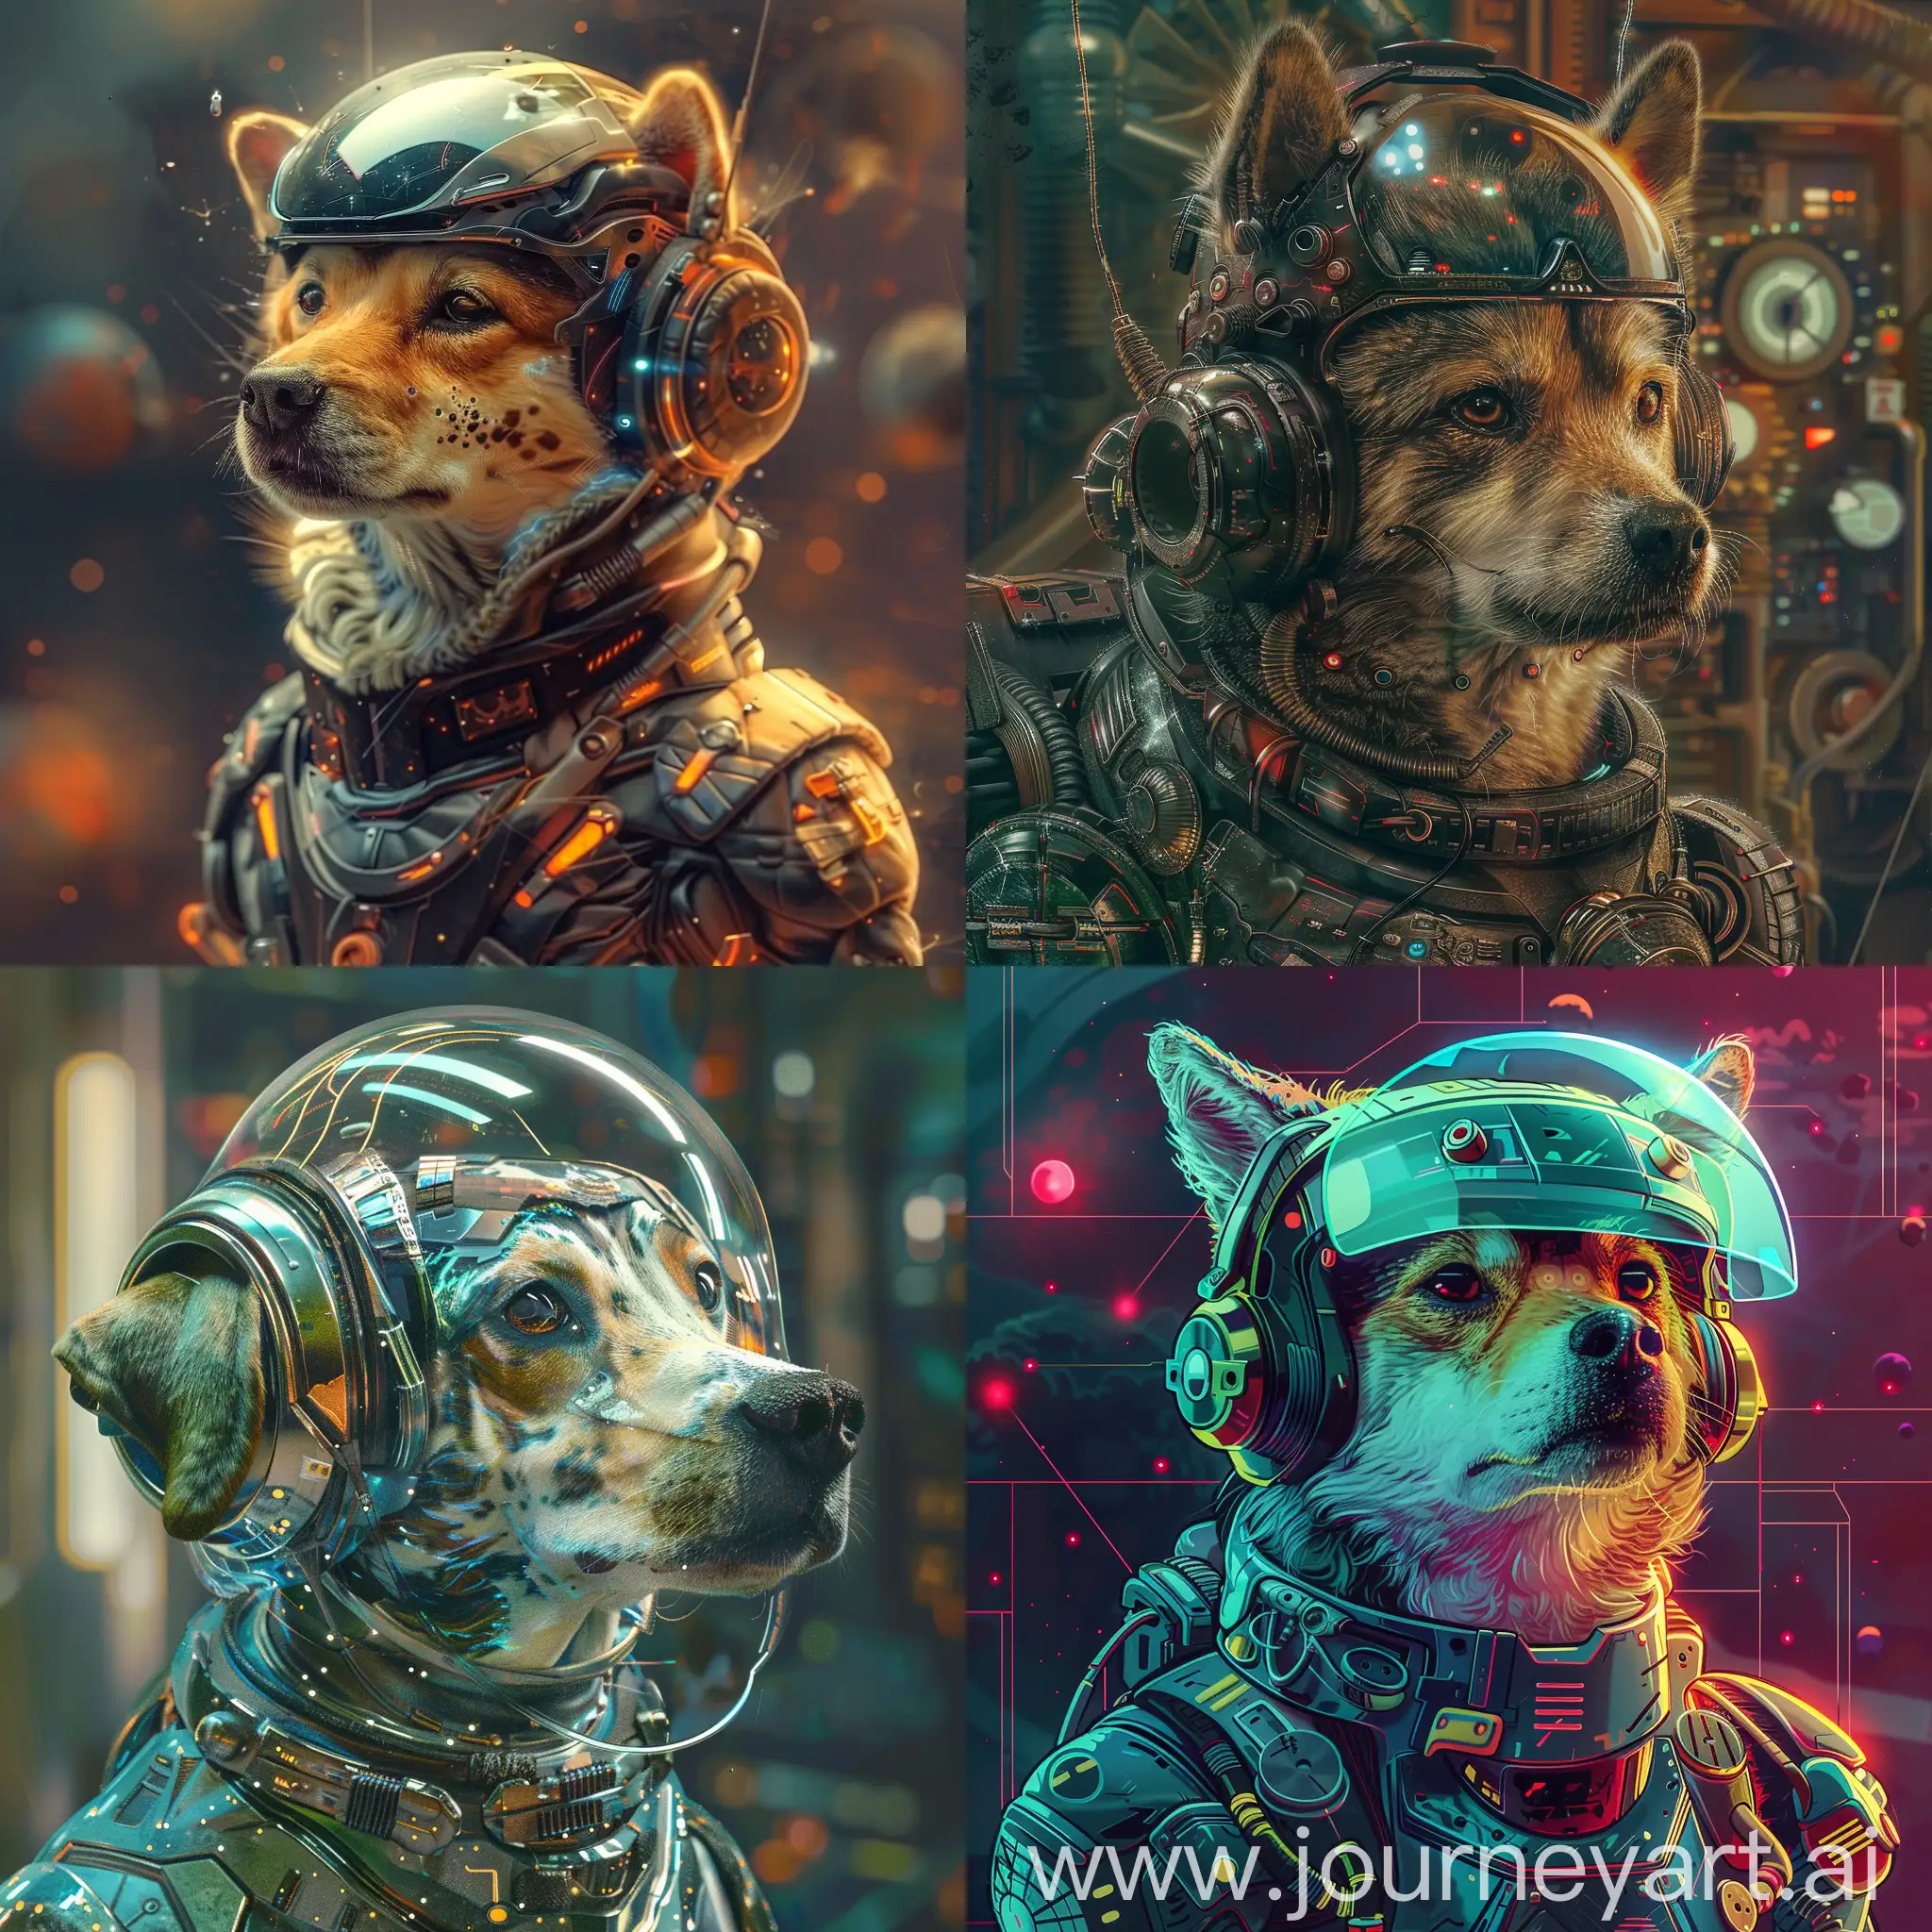 Futuristic galactic dog with galactic armor and helmet, moebius style image, art